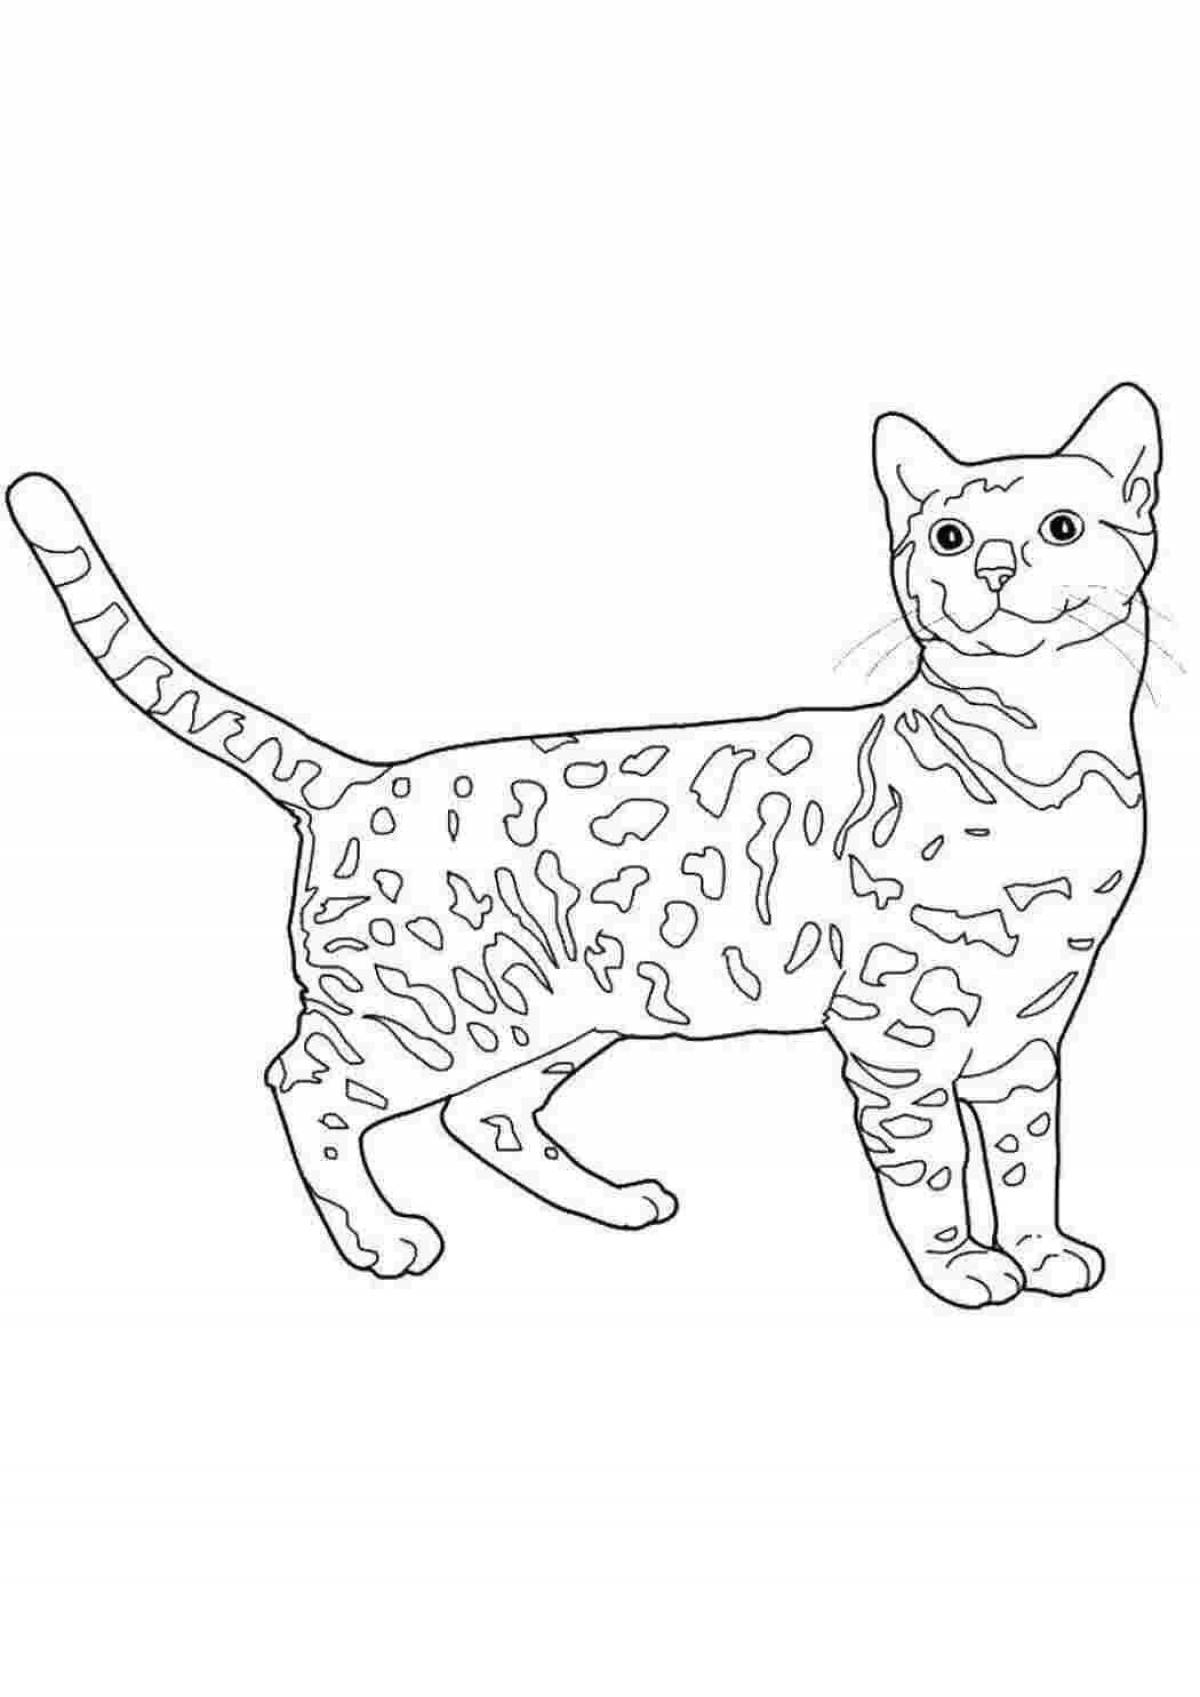 Colorful whiskas cat coloring page